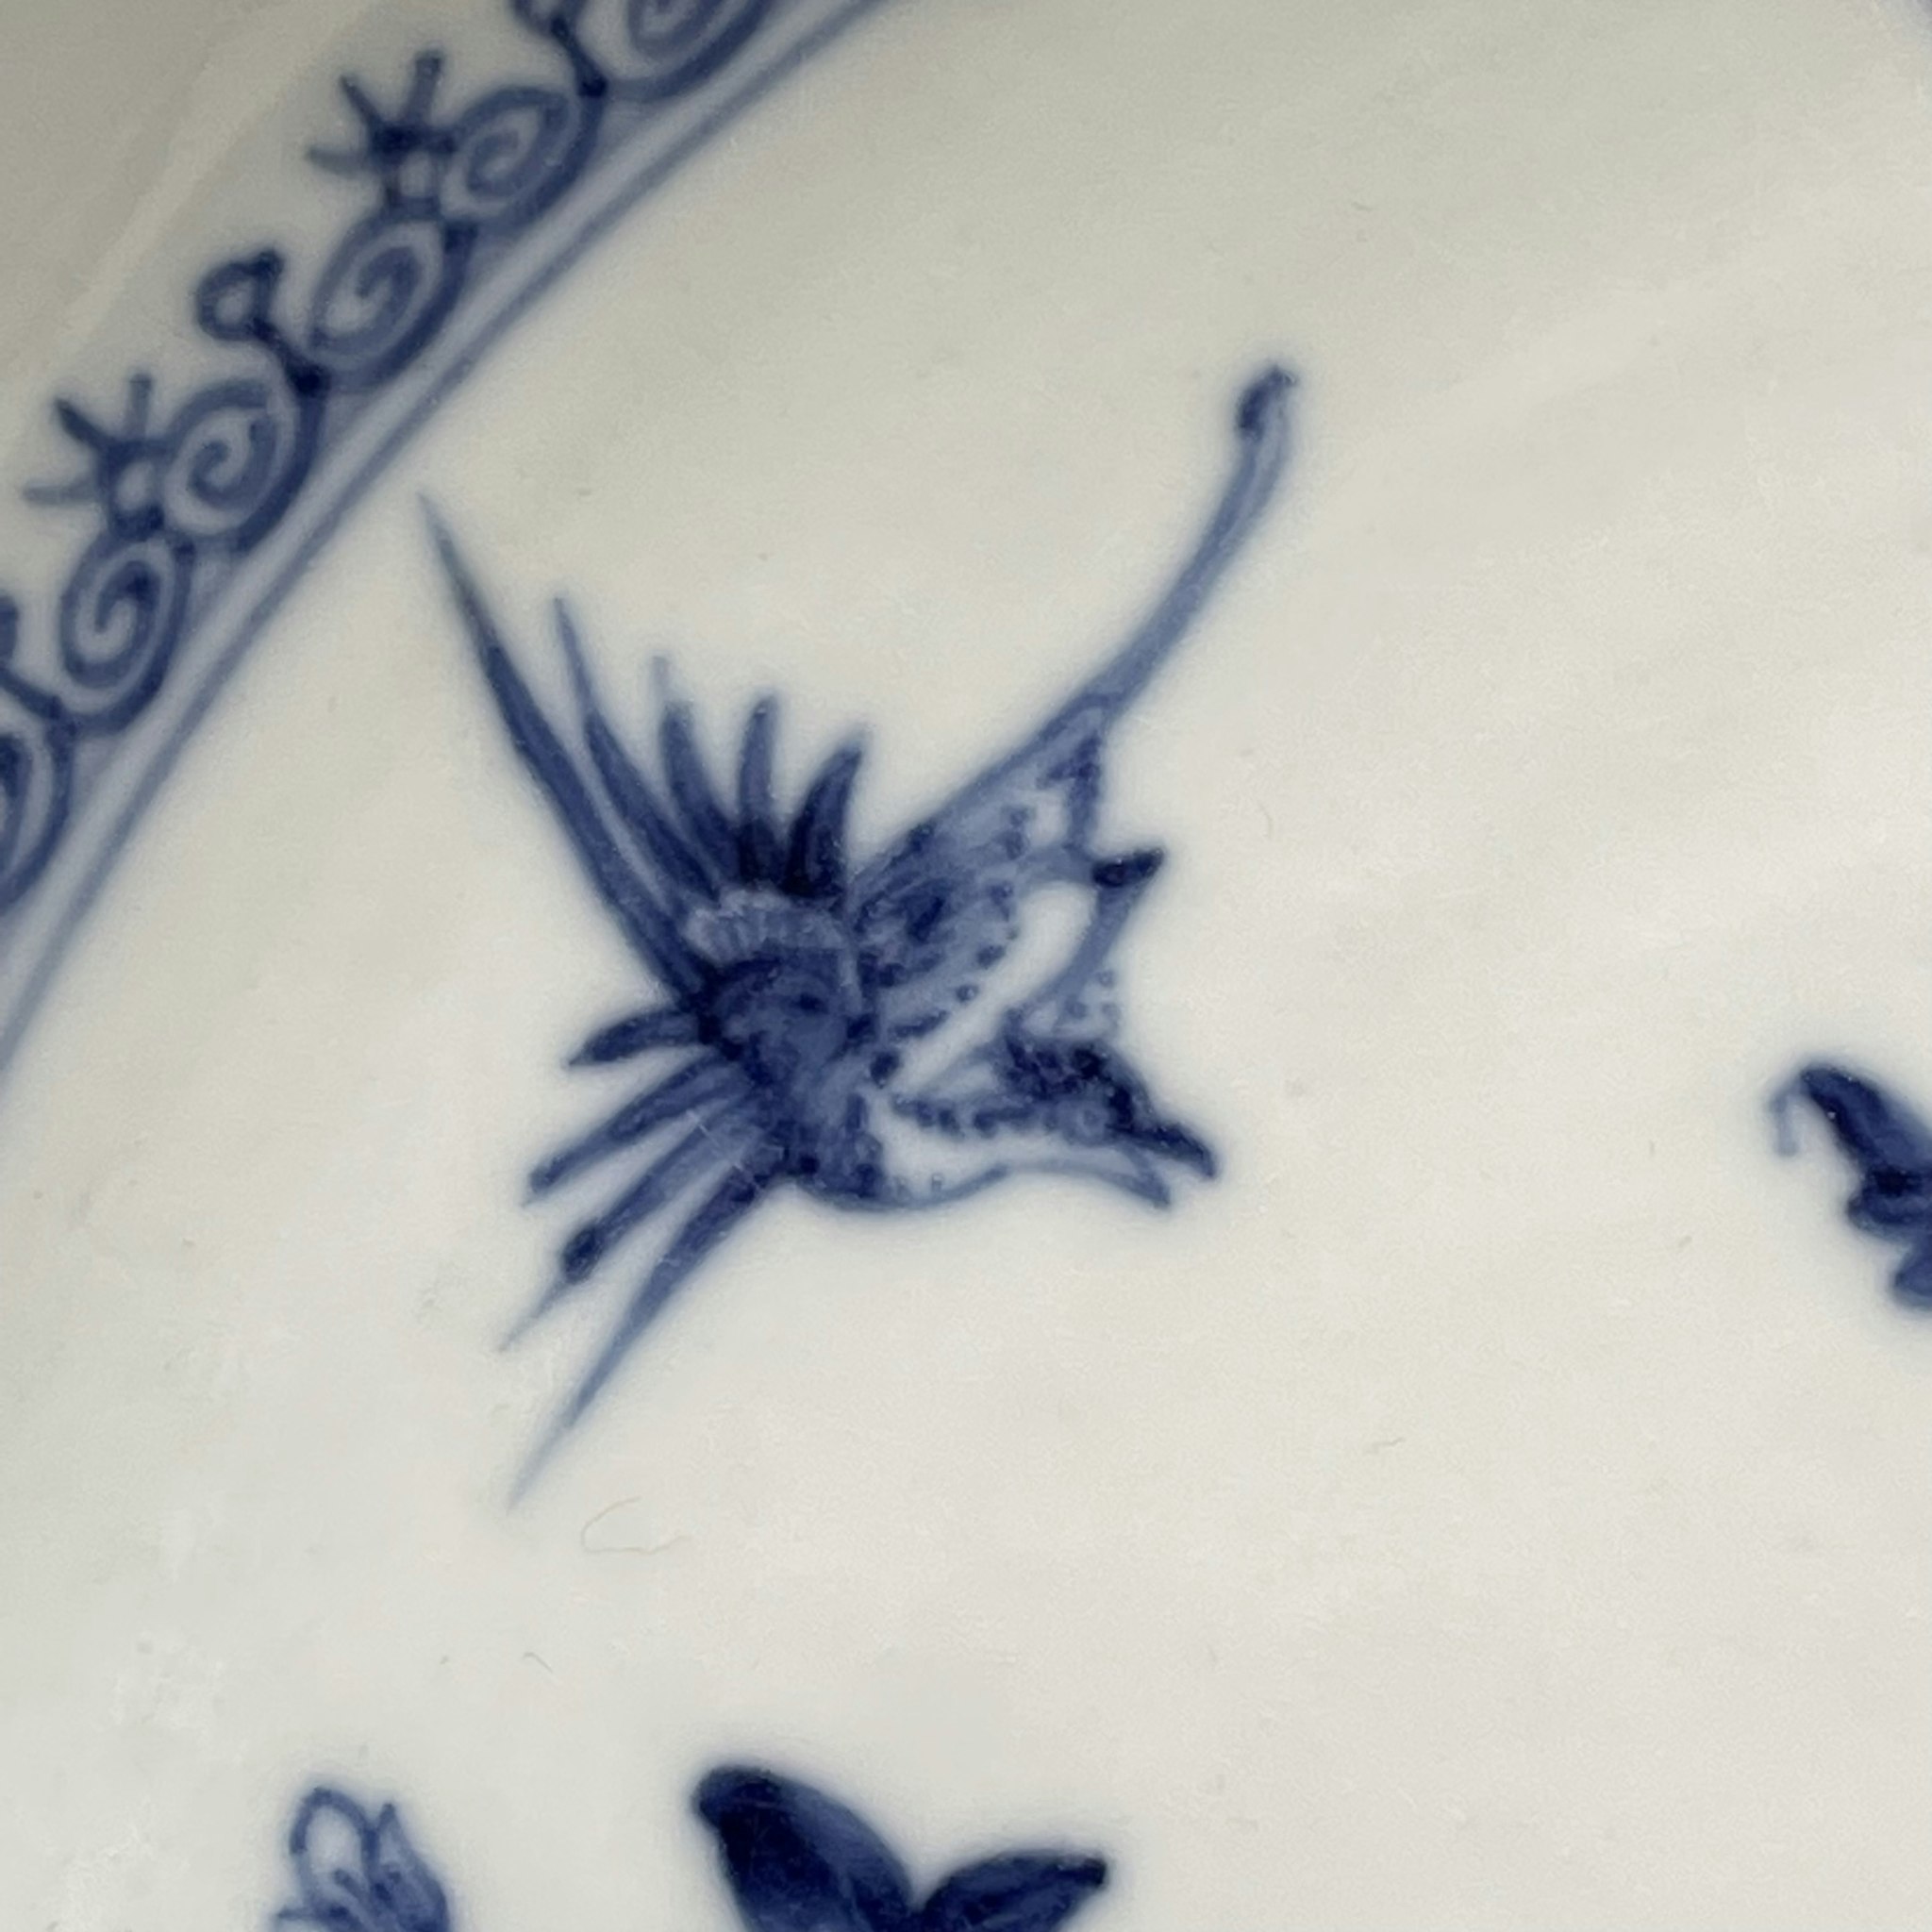 Antique Chinese Blue and white plate, 19th c, Qing Dynasty #1172